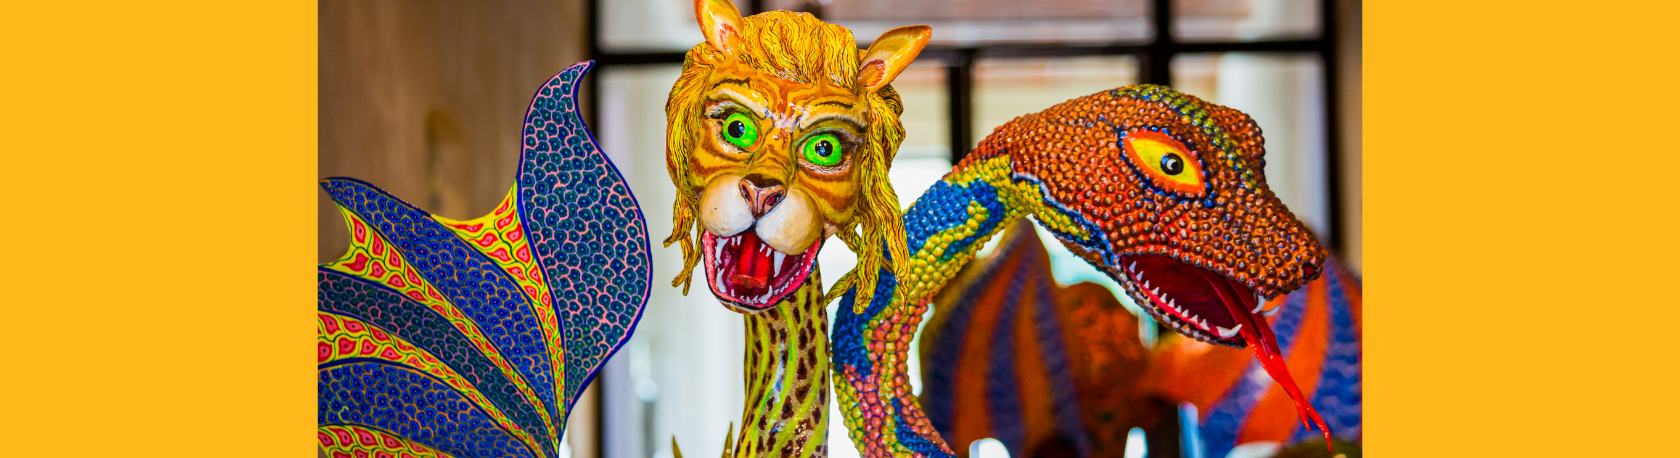 In-Person Guided Tour: Oaxaca Giant Alebrijes at The Rockefeller Center - Easy Español